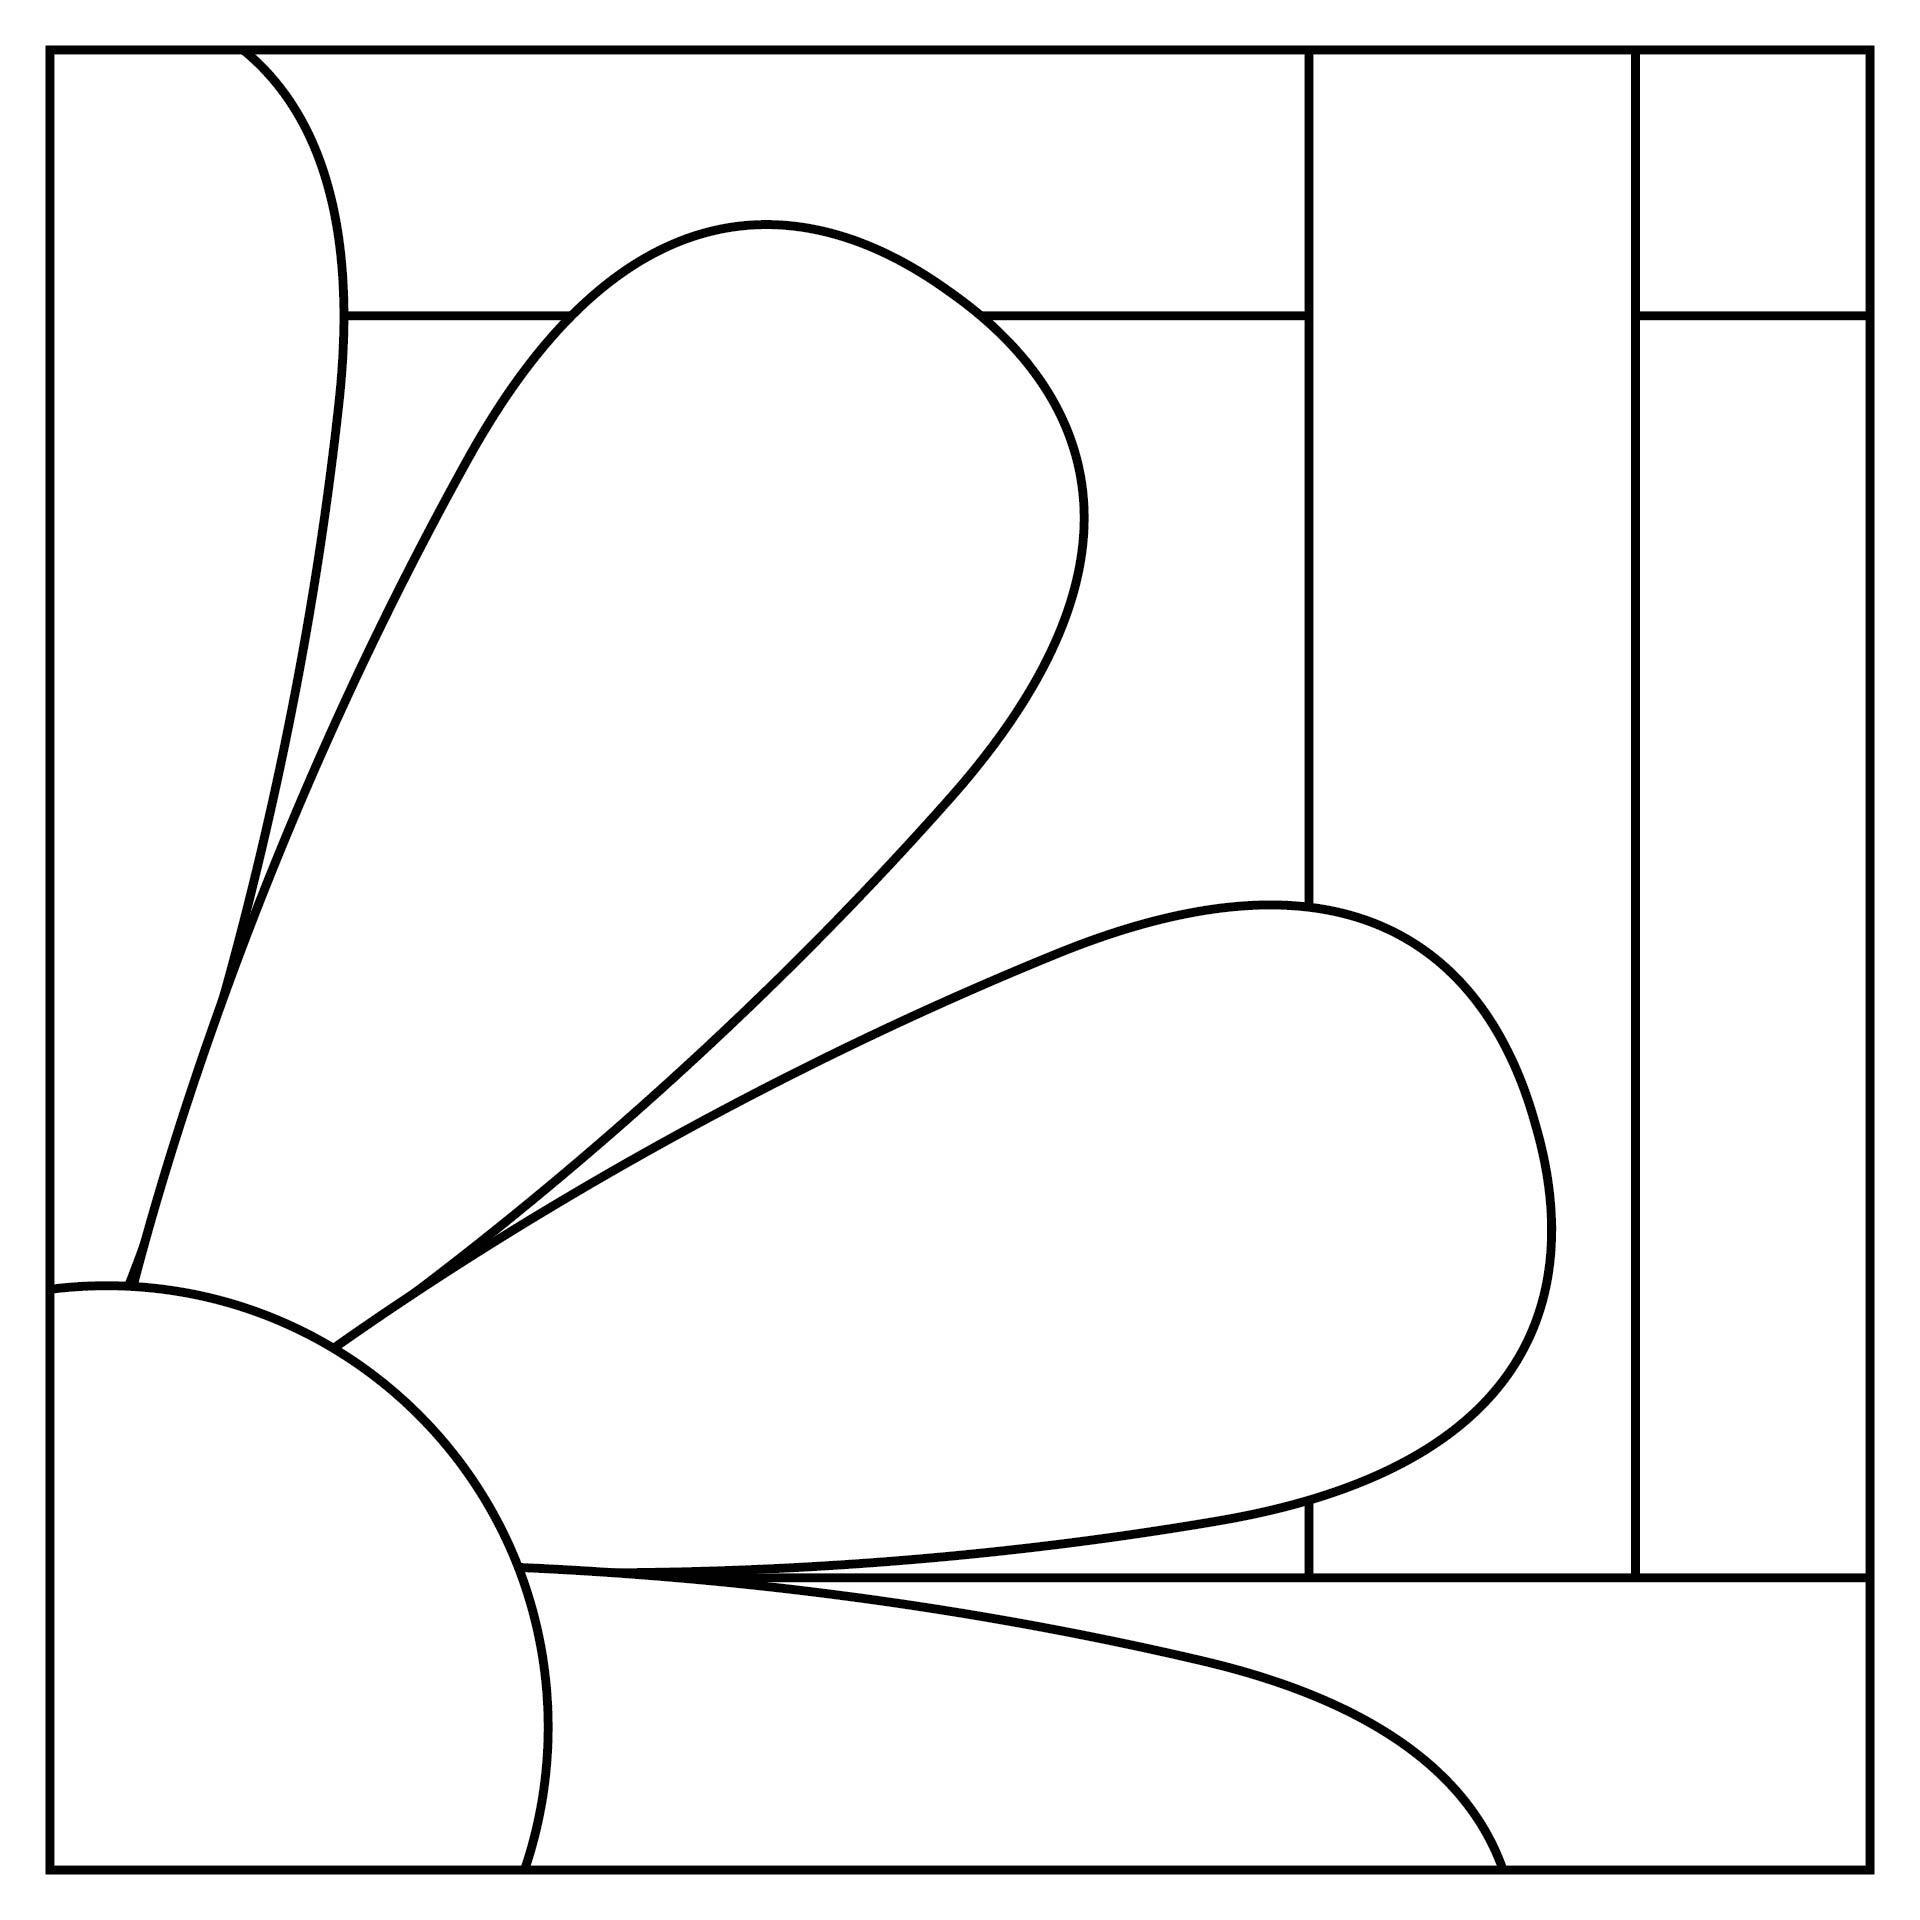 5-best-images-of-beginner-stained-glass-patterns-printable-simple-stained-glass-patterns